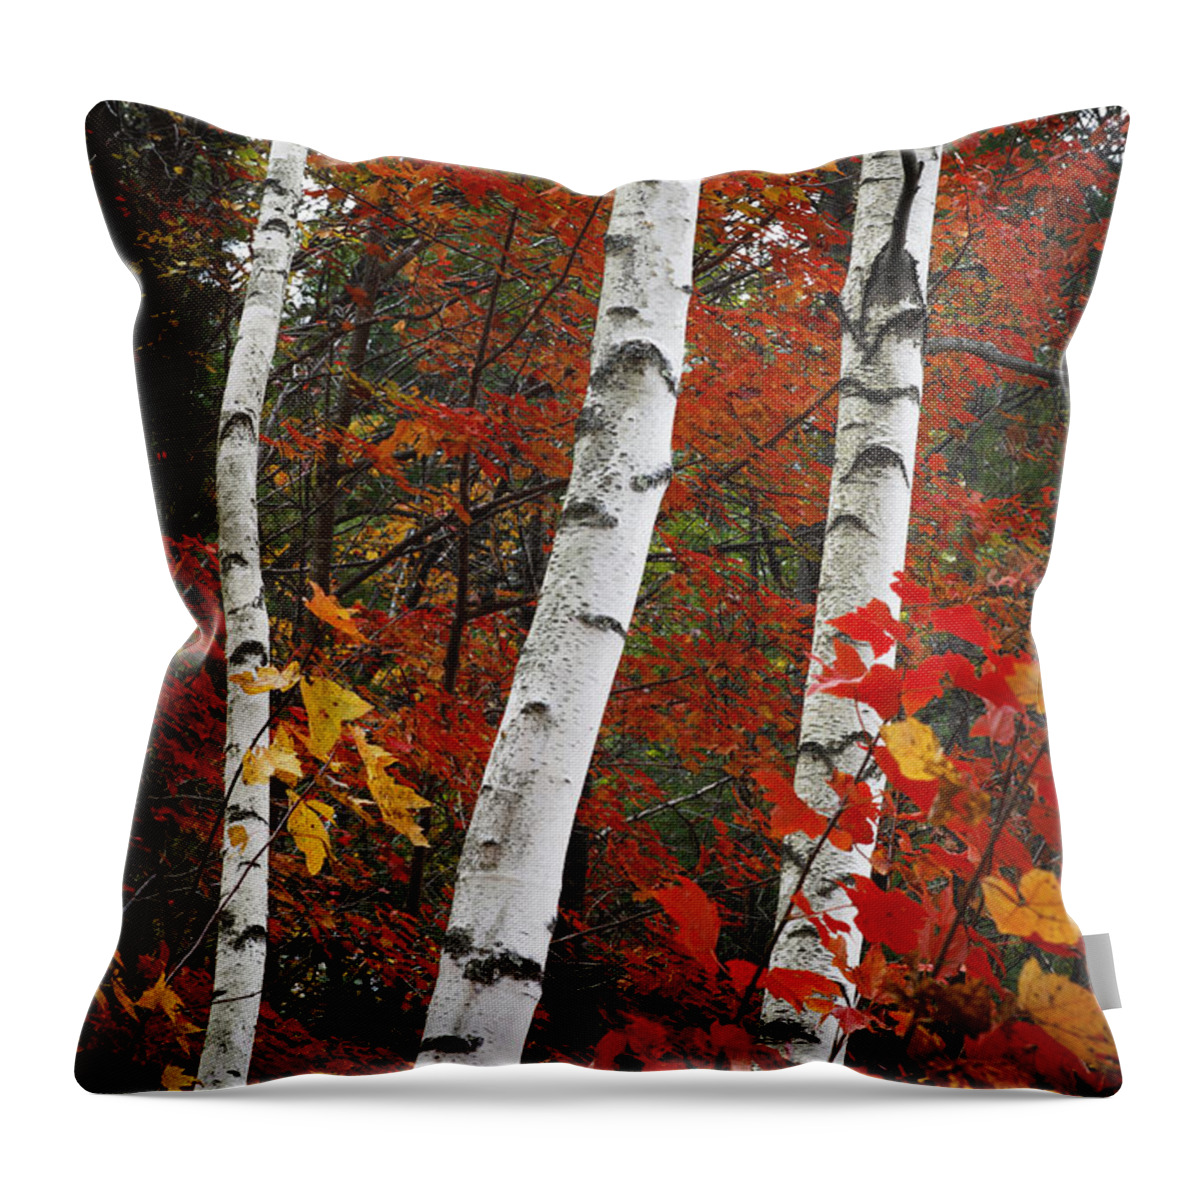 Landscape Throw Pillow featuring the photograph Proud by Dominique Dubied